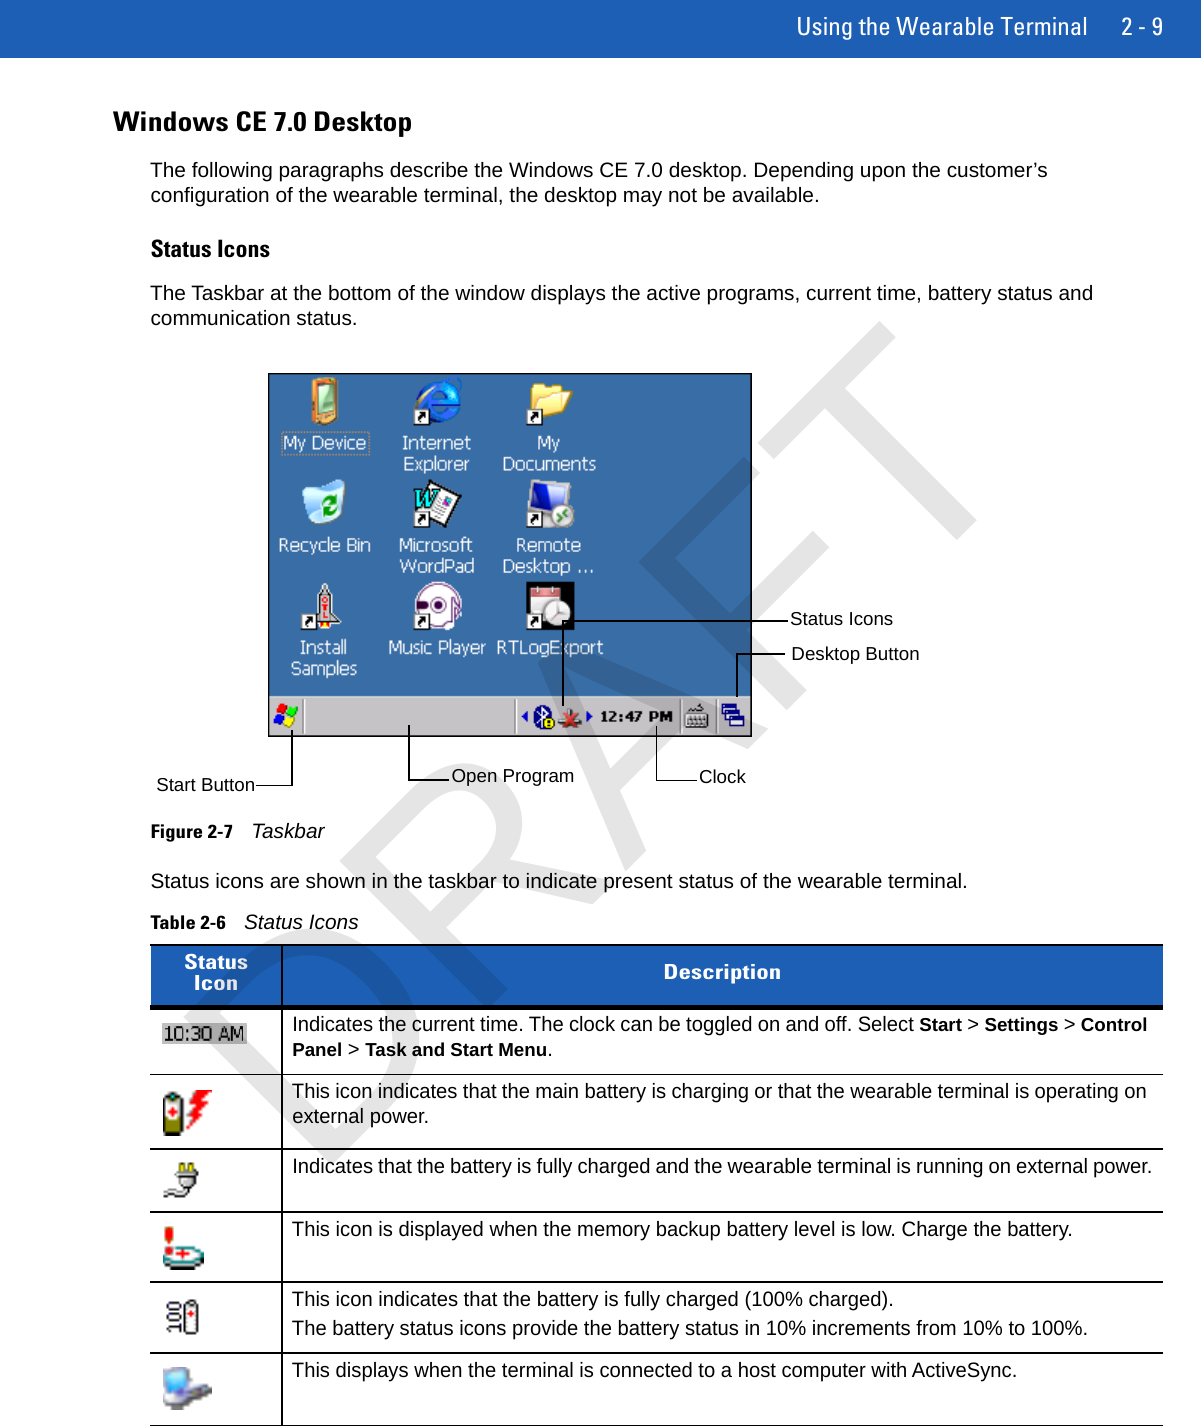 Using the Wearable Terminal 2 - 9Windows CE 7.0 DesktopThe following paragraphs describe the Windows CE 7.0 desktop. Depending upon the customer’s configuration of the wearable terminal, the desktop may not be available.Status IconsThe Taskbar at the bottom of the window displays the active programs, current time, battery status and communication status.Figure 2-7TaskbarStatus icons are shown in the taskbar to indicate present status of the wearable terminal.Table 2-6Status Icons StatusIcon DescriptionIndicates the current time. The clock can be toggled on and off. Select Start &gt; Settings &gt; Control Panel &gt; Task and Start Menu.This icon indicates that the main battery is charging or that the wearable terminal is operating on external power.Indicates that the battery is fully charged and the wearable terminal is running on external power.This icon is displayed when the memory backup battery level is low. Charge the battery.This icon indicates that the battery is fully charged (100% charged).The battery status icons provide the battery status in 10% increments from 10% to 100%.This displays when the terminal is connected to a host computer with ActiveSync.Start Button Open ProgramStatus IconsDesktop ButtonClockDRAFT